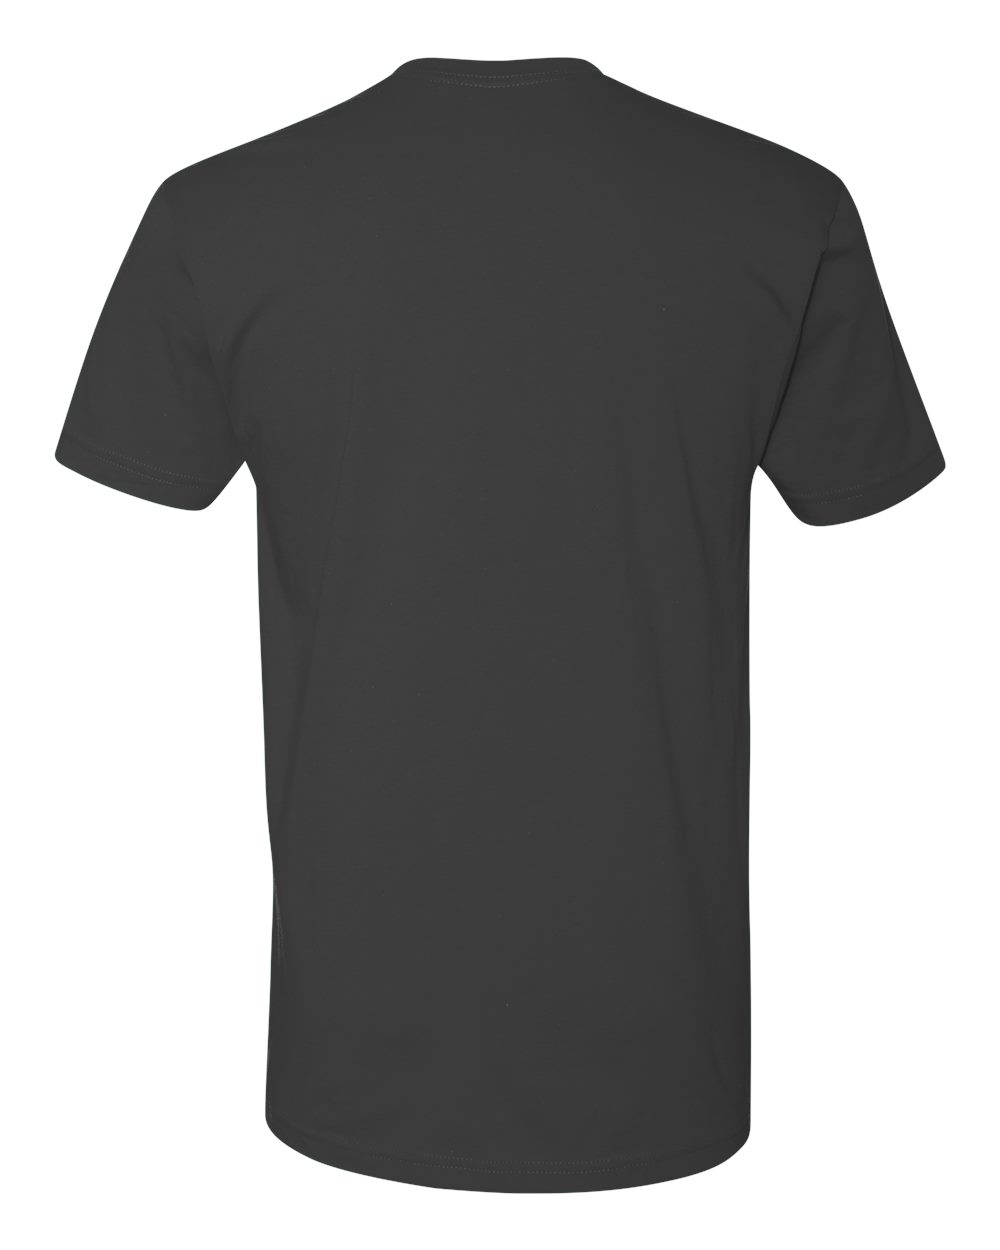 Next Level Apparel - Unisex Tee's 3600 - Charcoal Gray